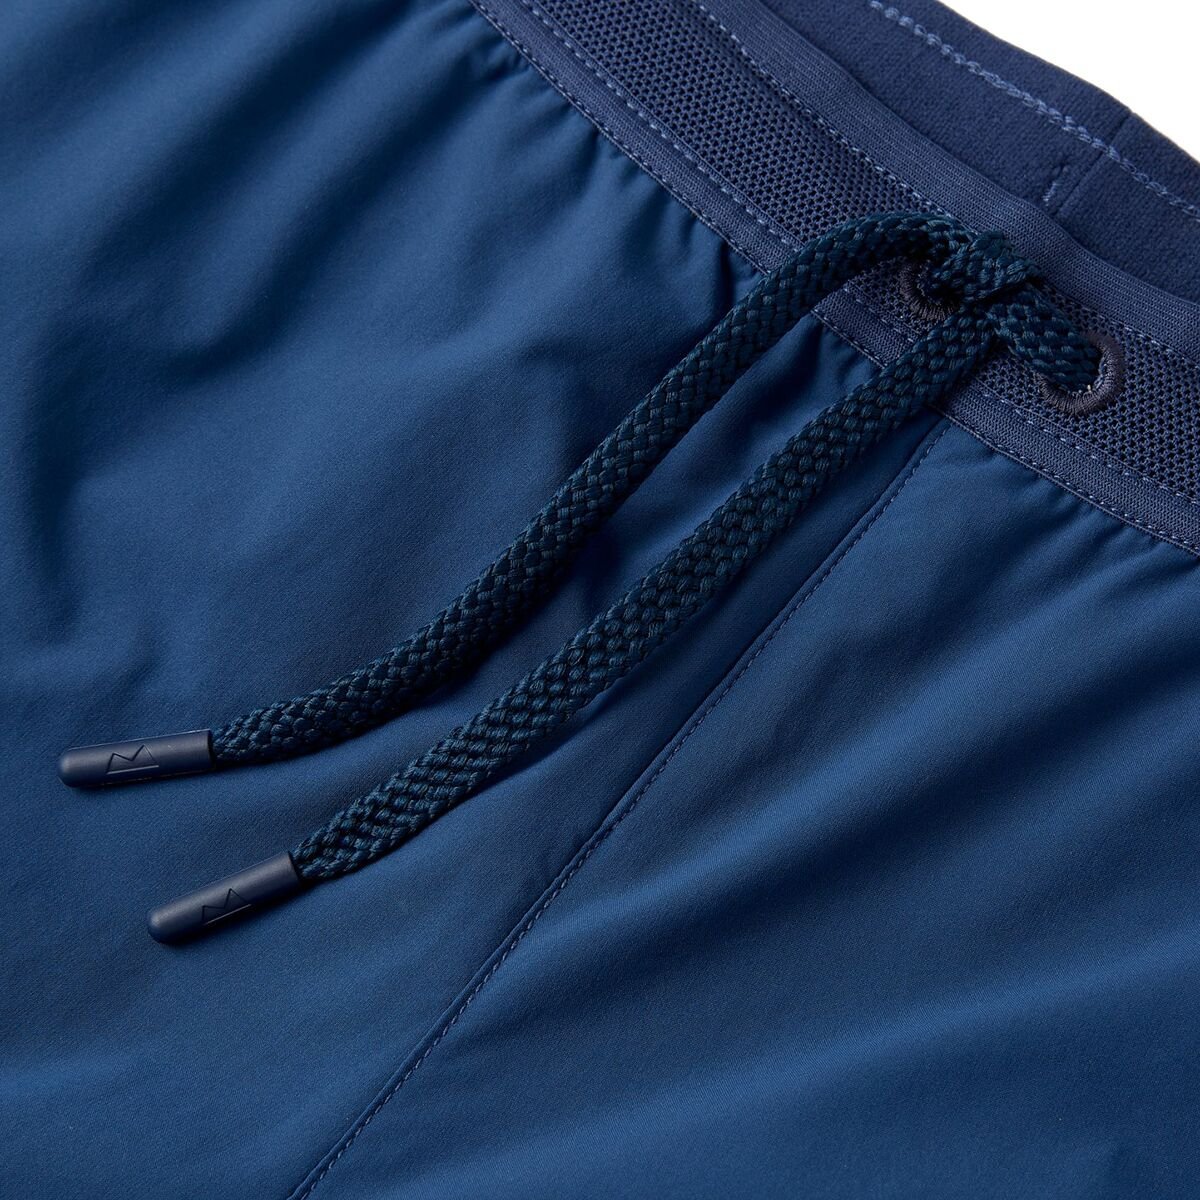 Why Myles Switchback Shorts Are the Perfect Match for the Outdoorsy You?